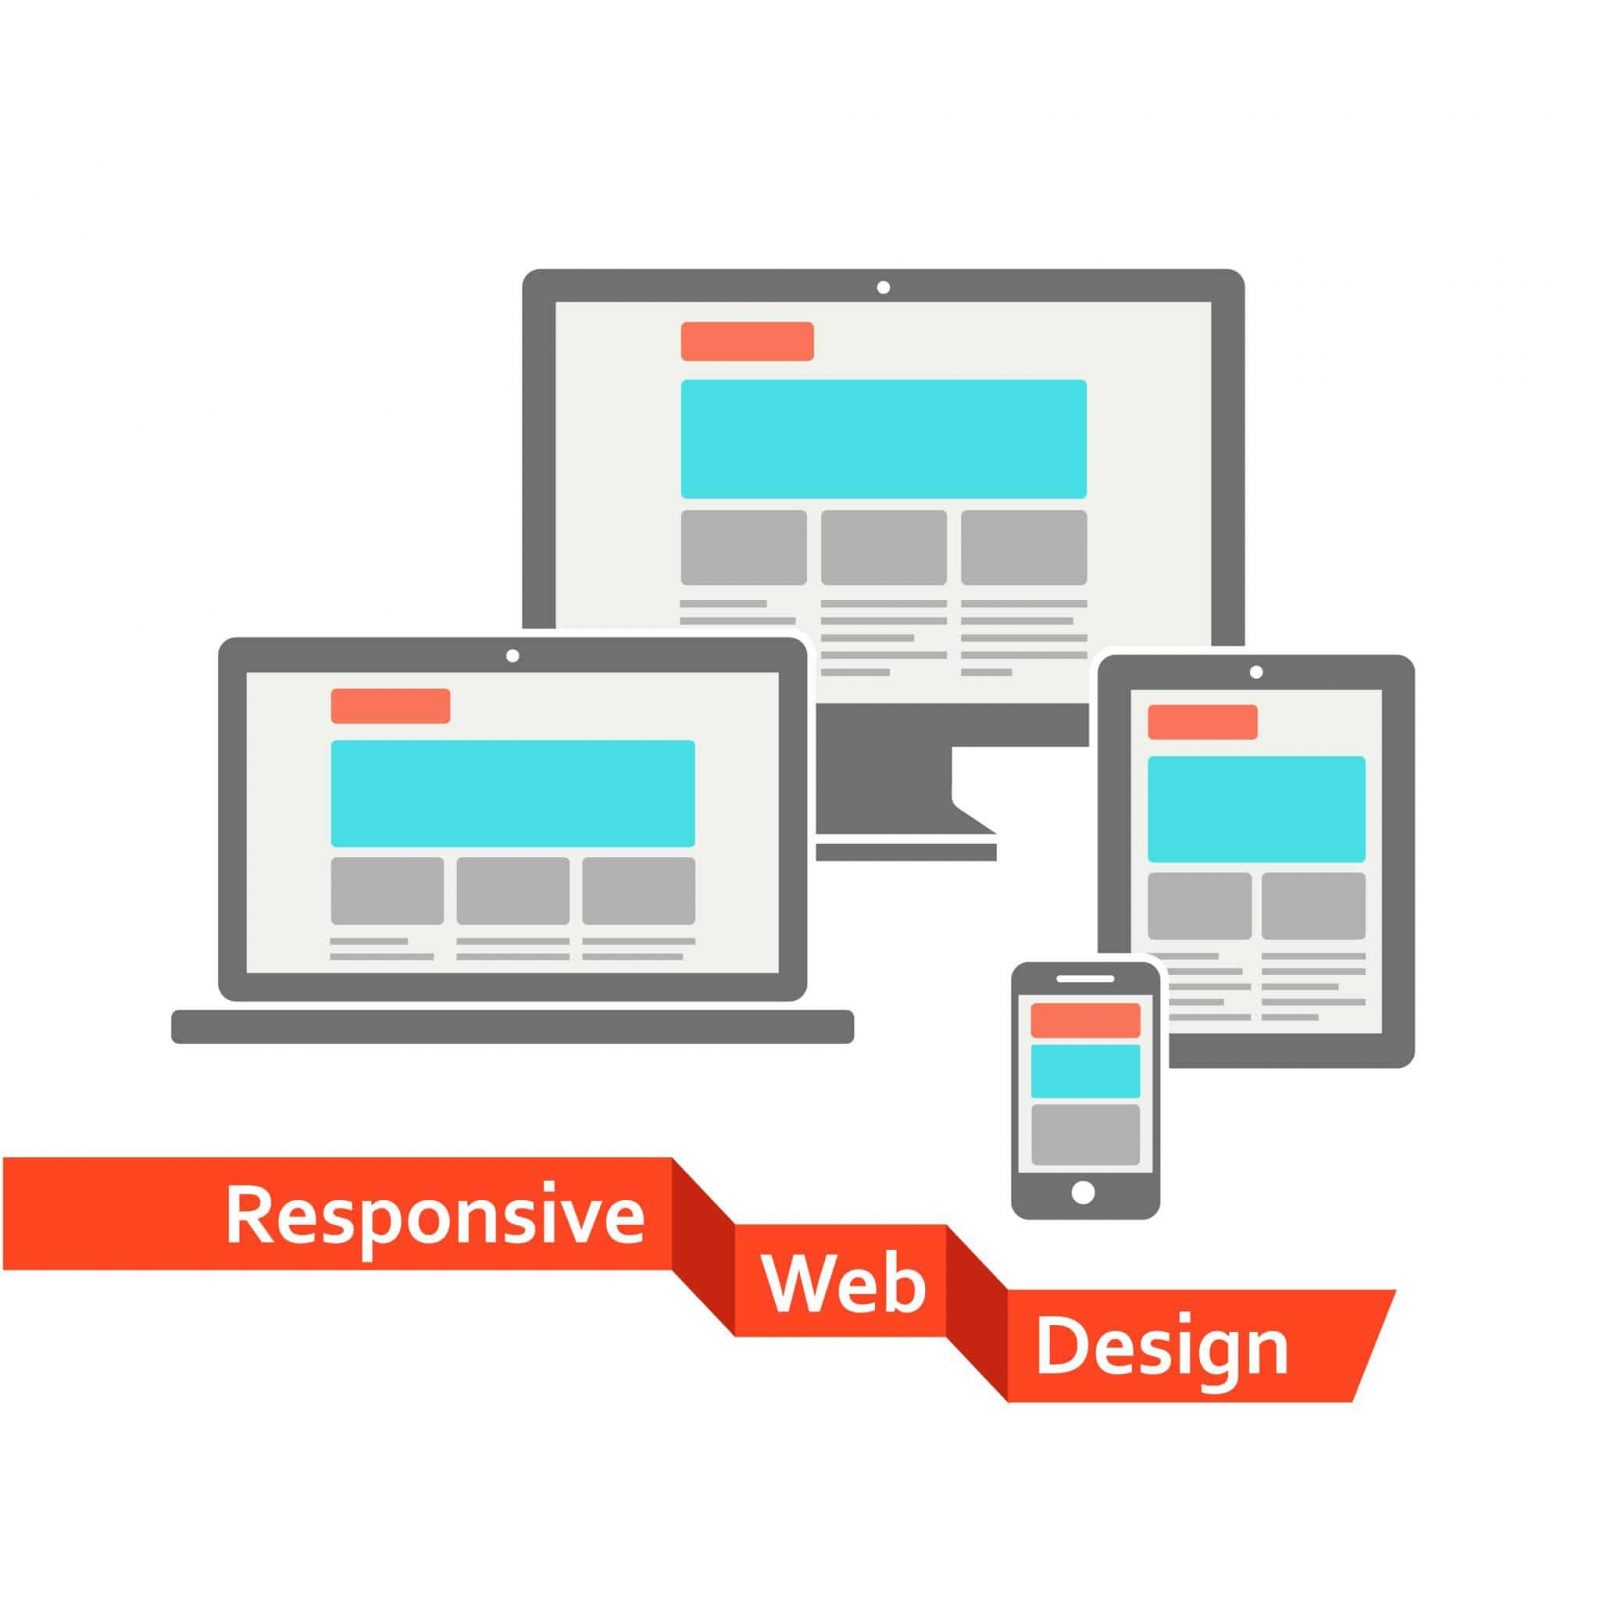 Responsive Web Design: What Is It?